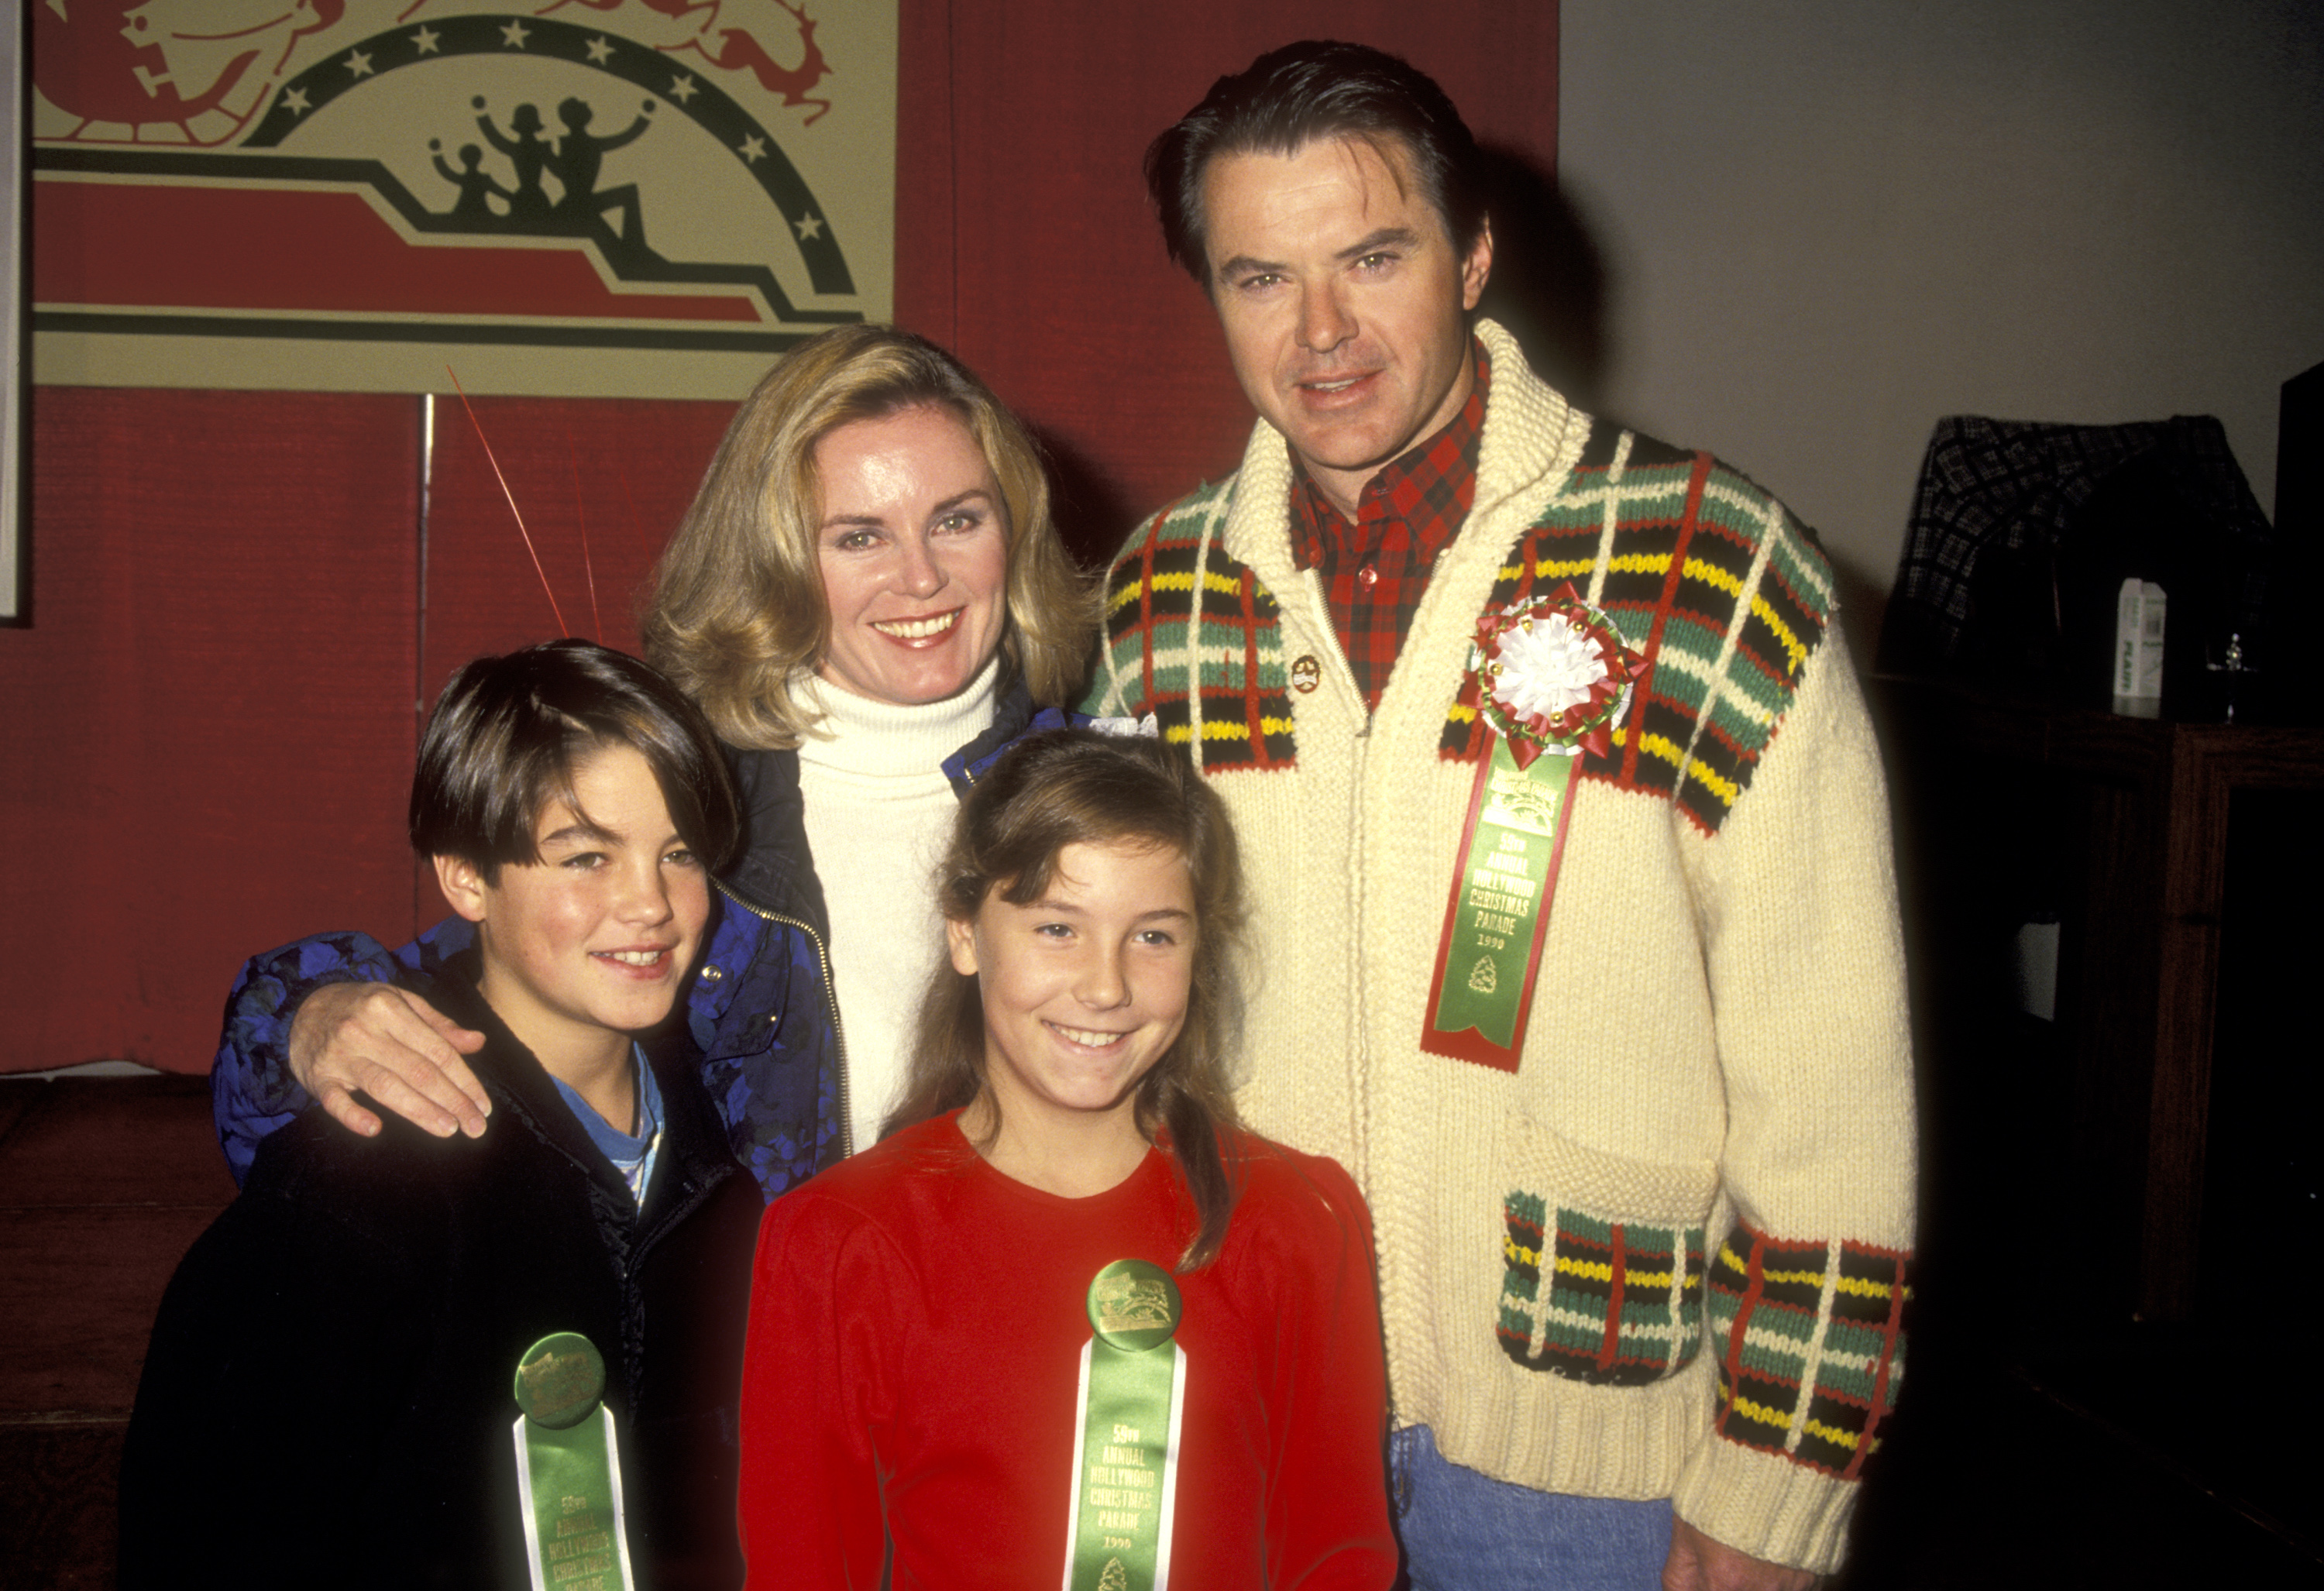 Ryan Urich, Heather Menzies, Emily Urich, and Robert Urich at the 59th Annual Hollywood Christmas Parade on November 25, 1990, in Hollywood, California | Source: Getty Images